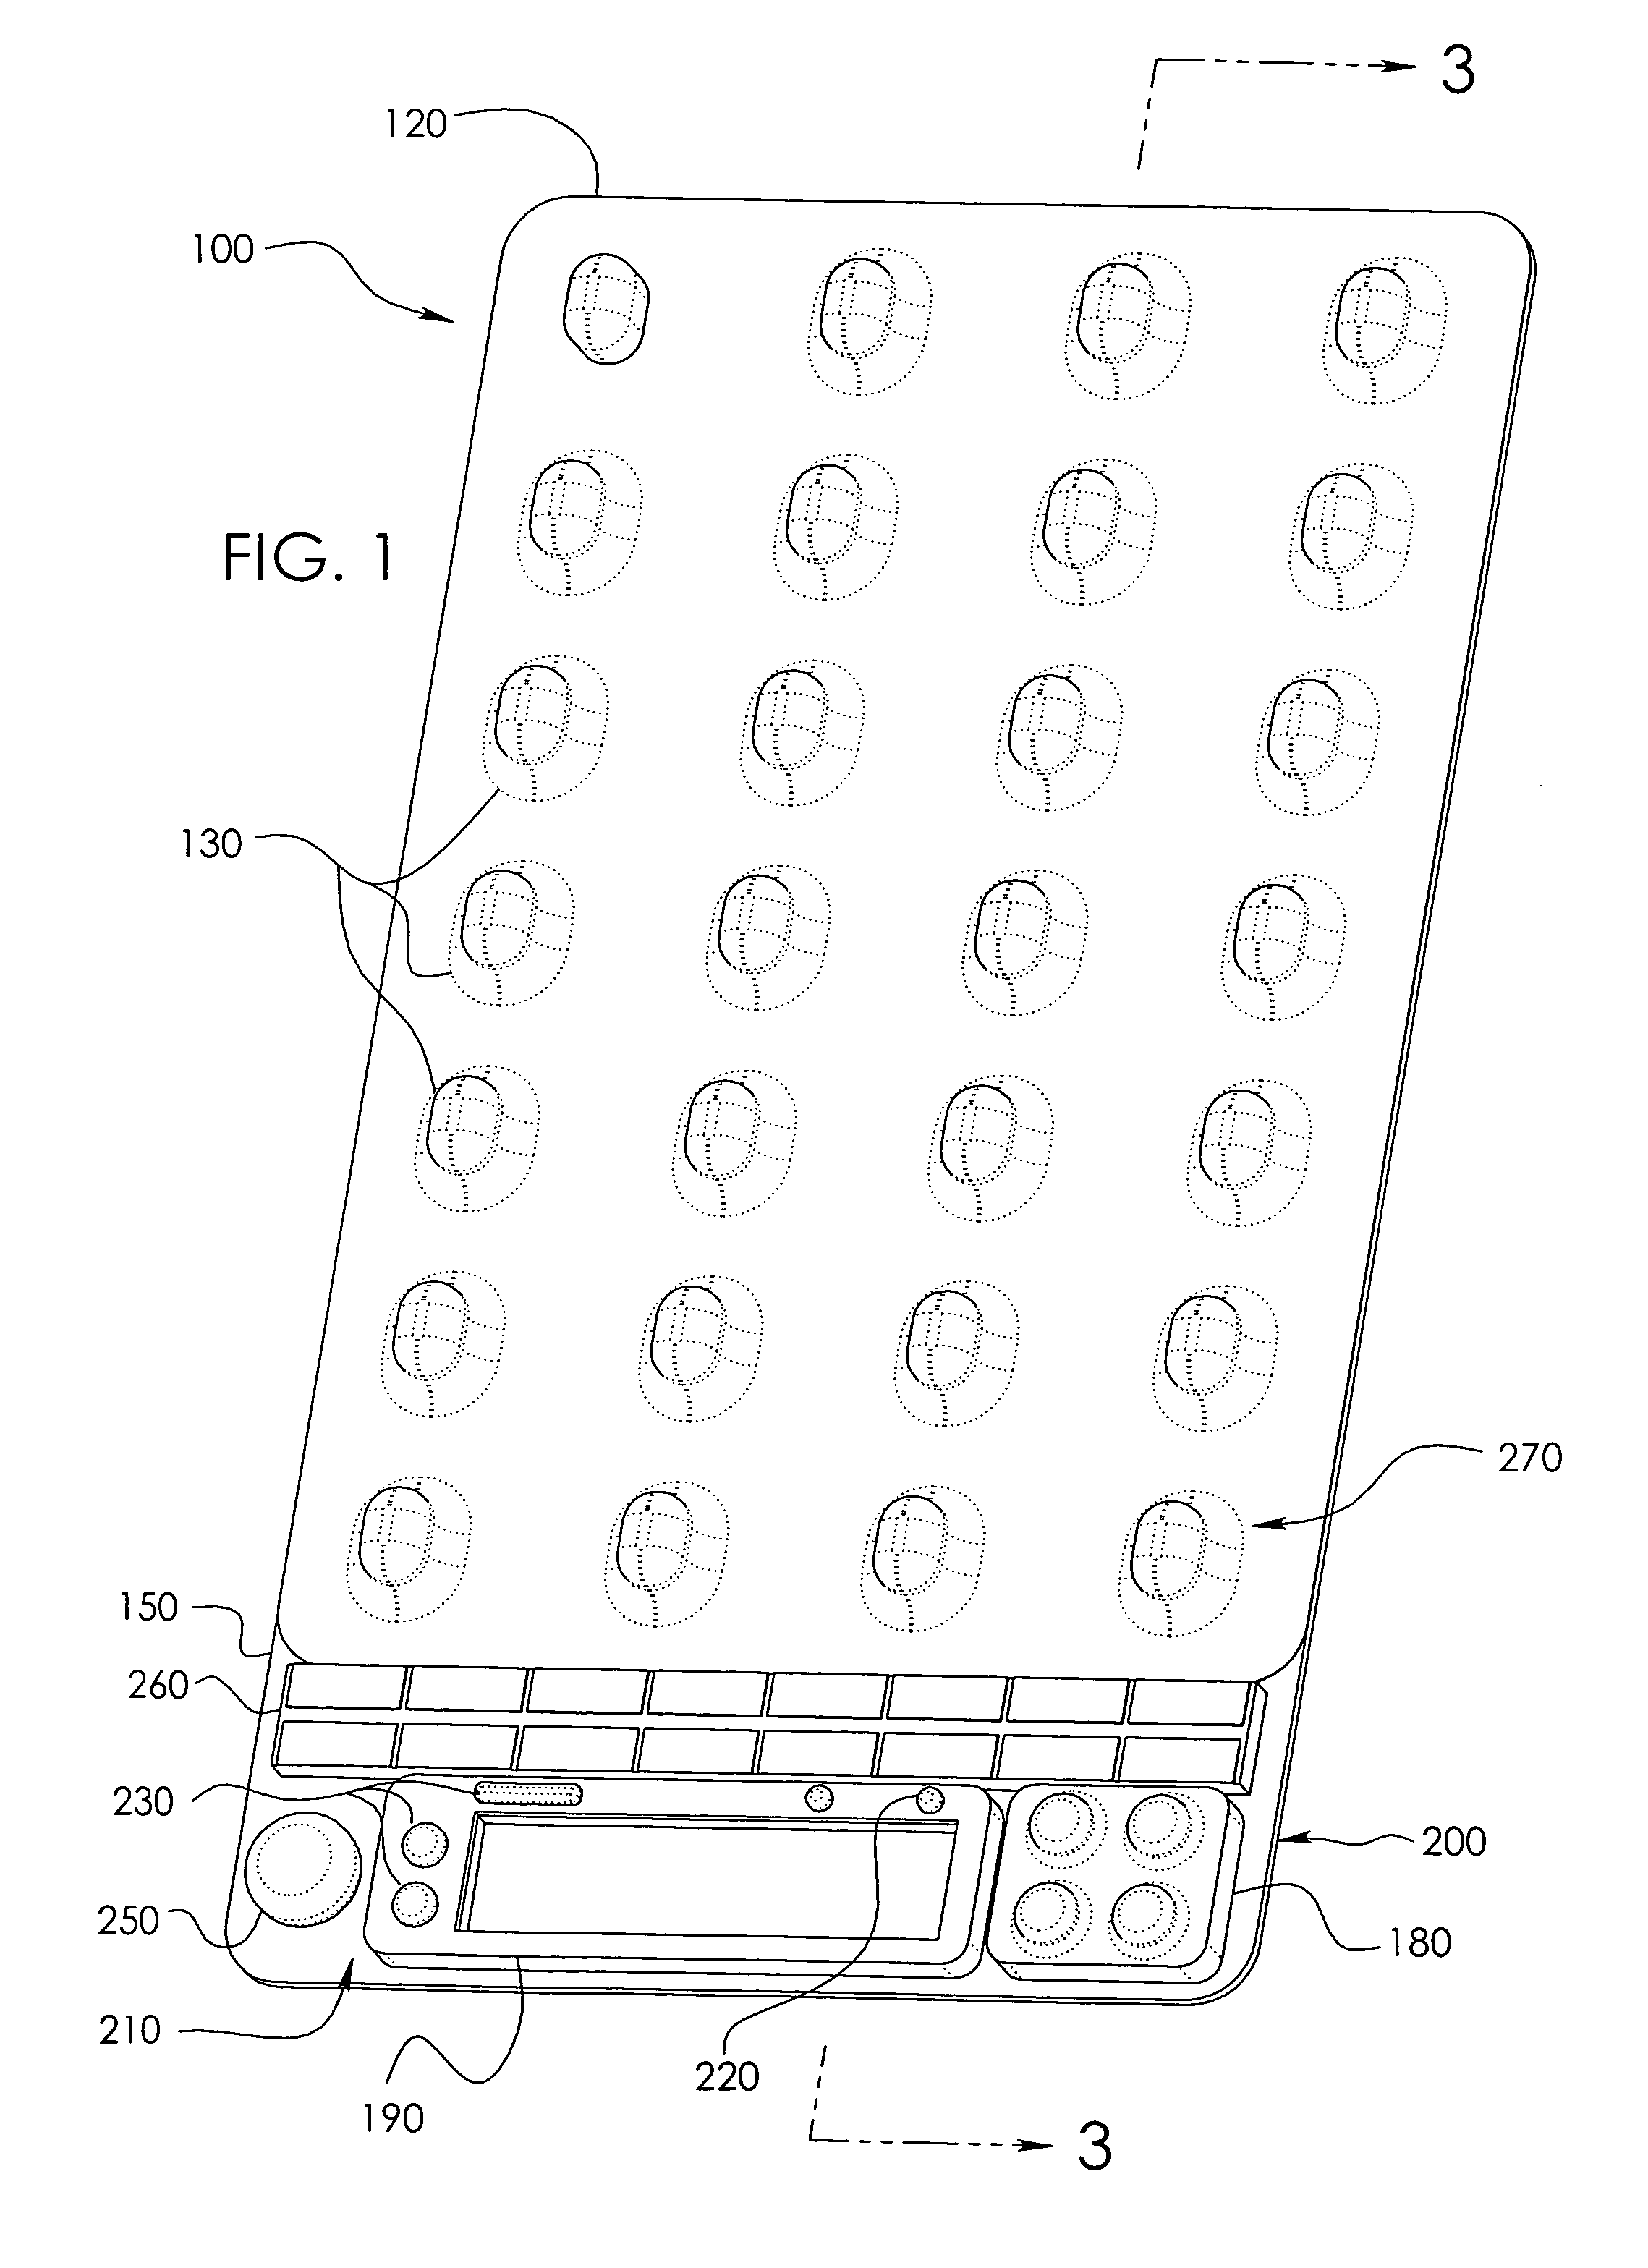 Unit dose compliance monitoring and reporting device and system